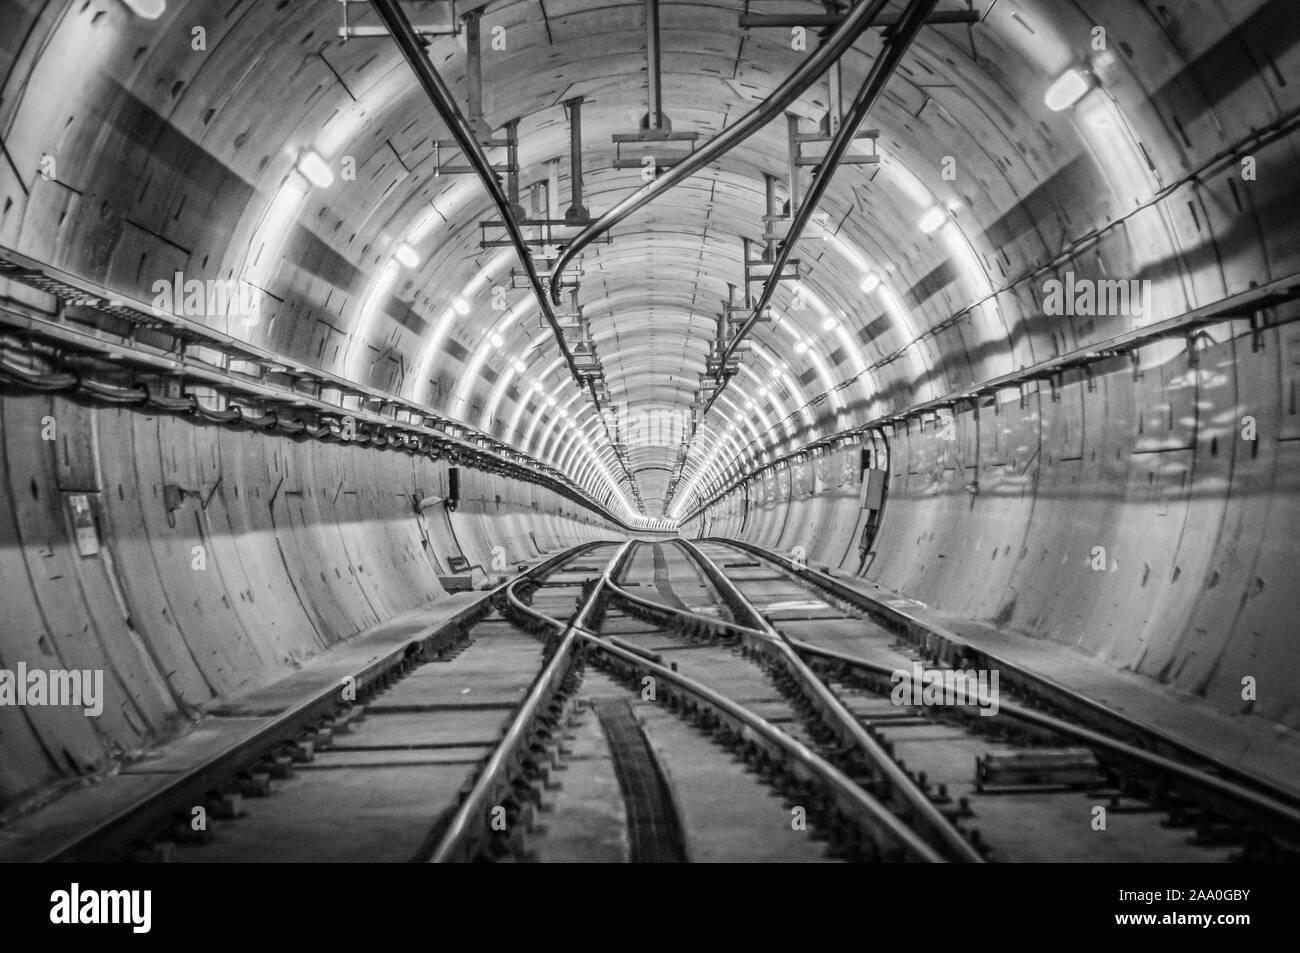 Two parallel railways in a concrete tunnel Stock Photo